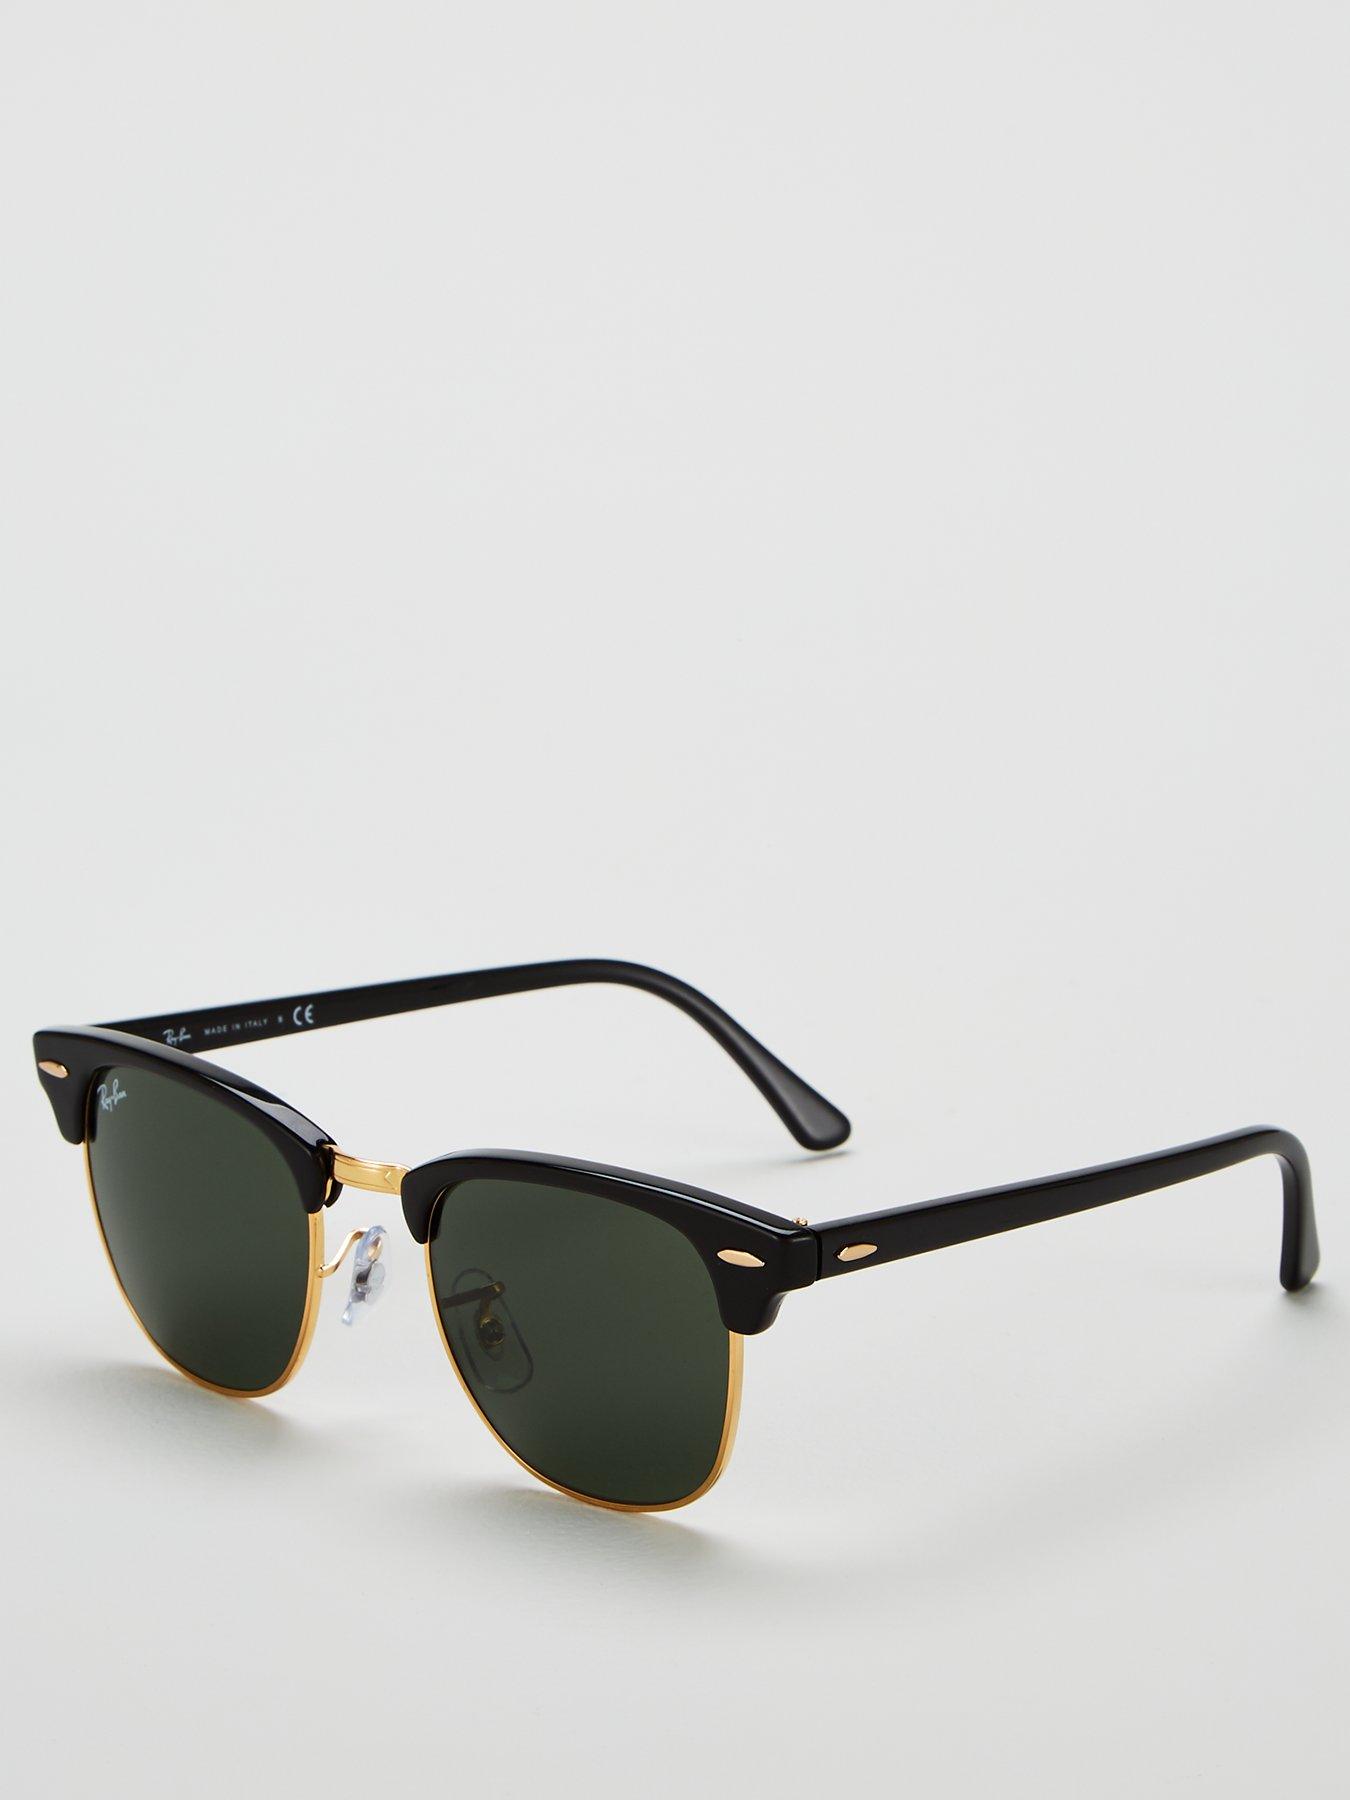 Ray-Ban Clubmaster 0RB3016 Sunglasses - Black | very.co.uk